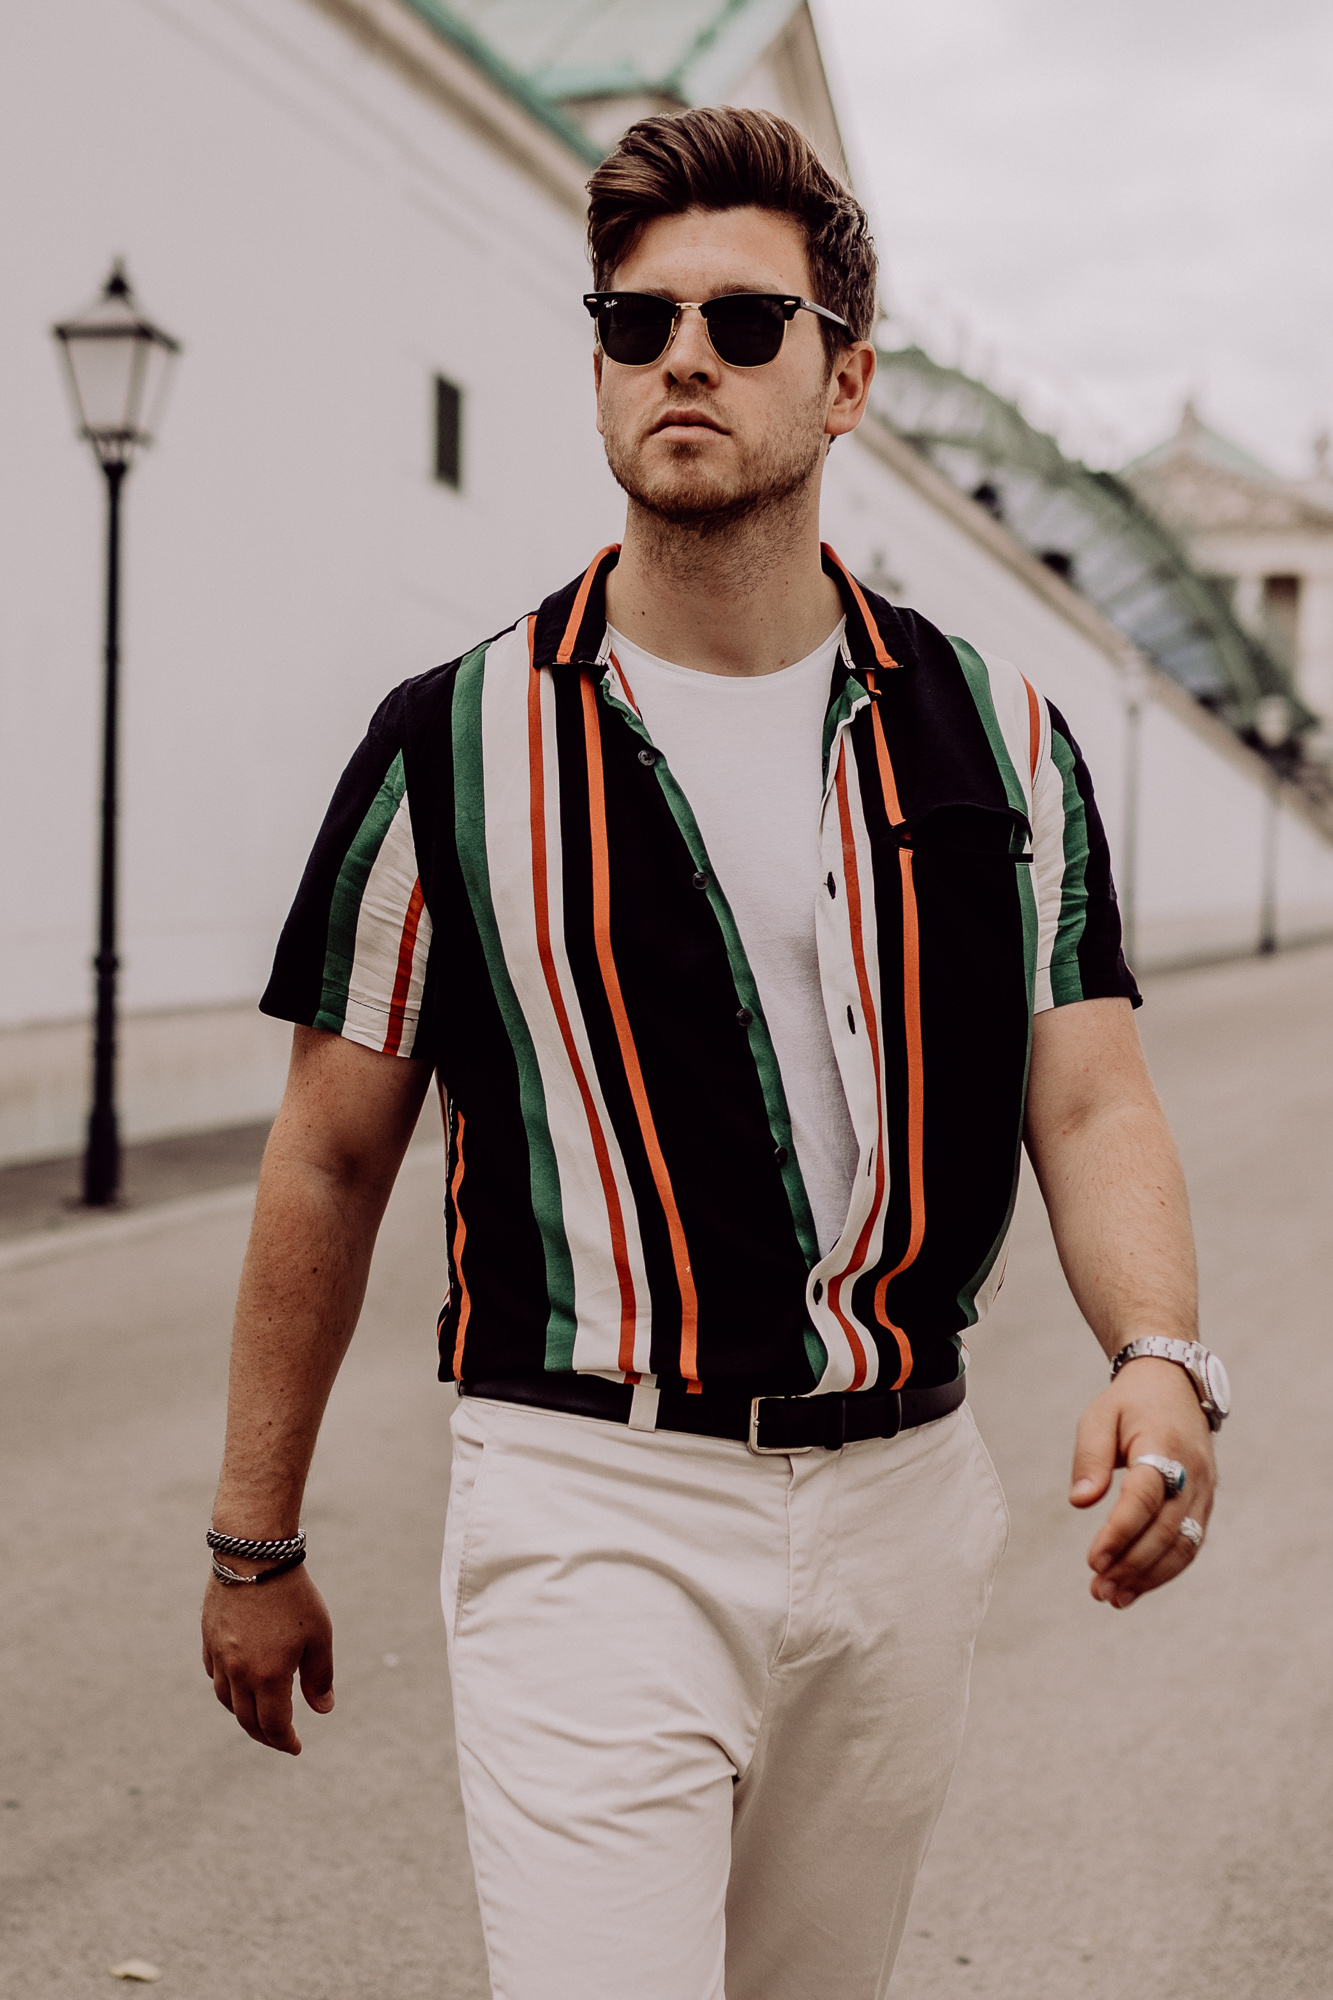 Summer 2018 Trends for Men - Vertical Stripes | MEANWHILEINAWESOMETOWN